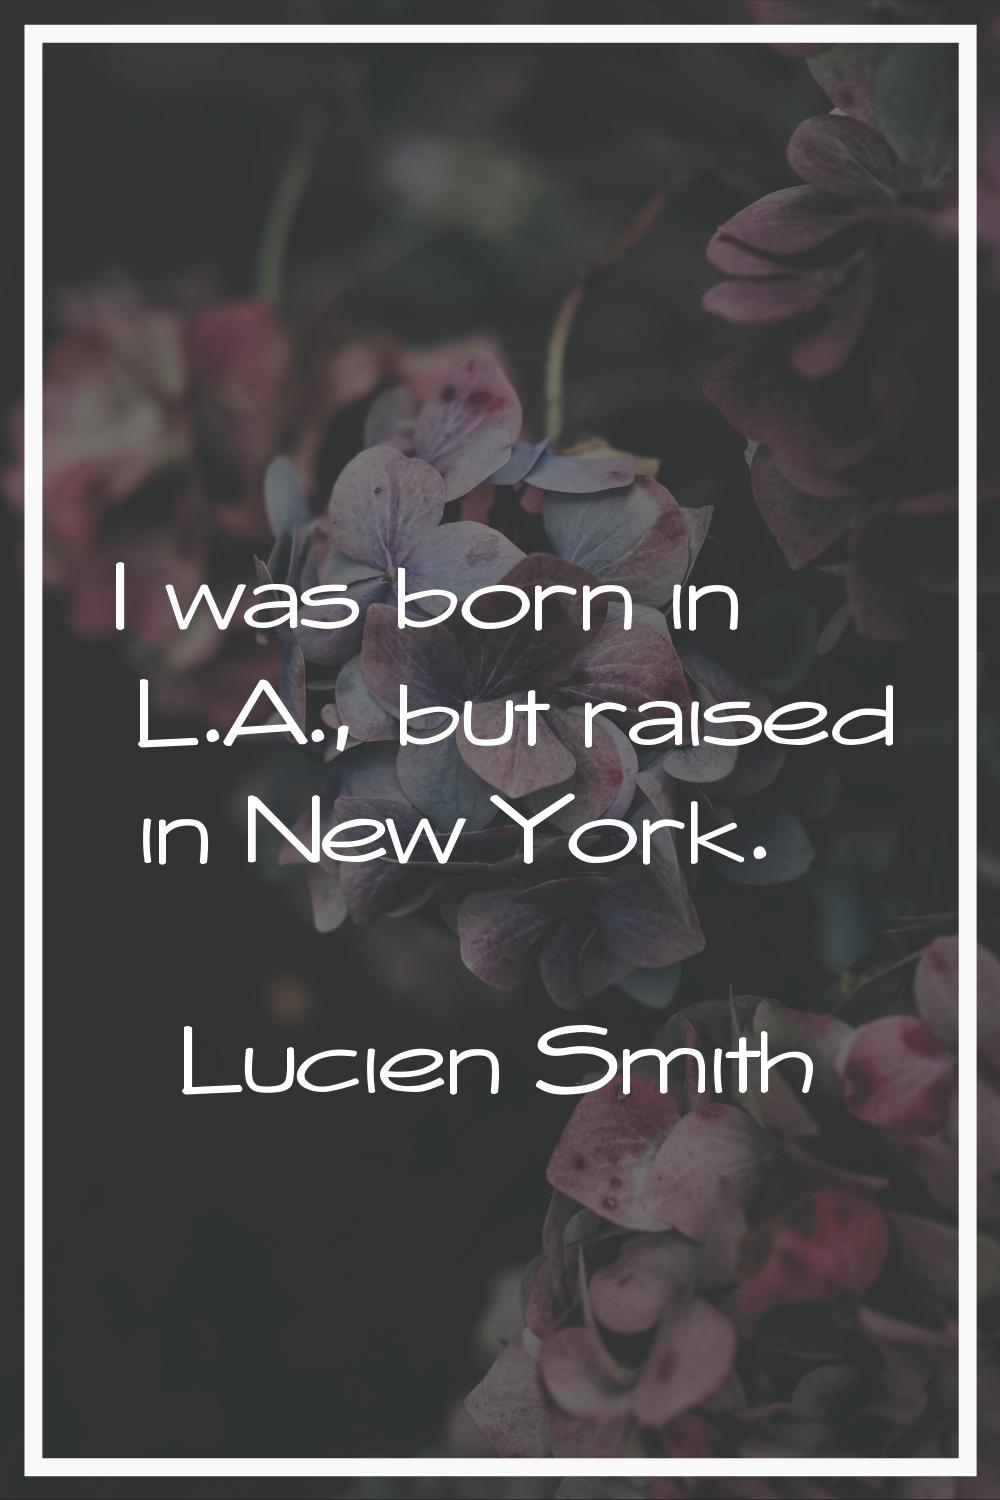 I was born in L.A., but raised in New York.